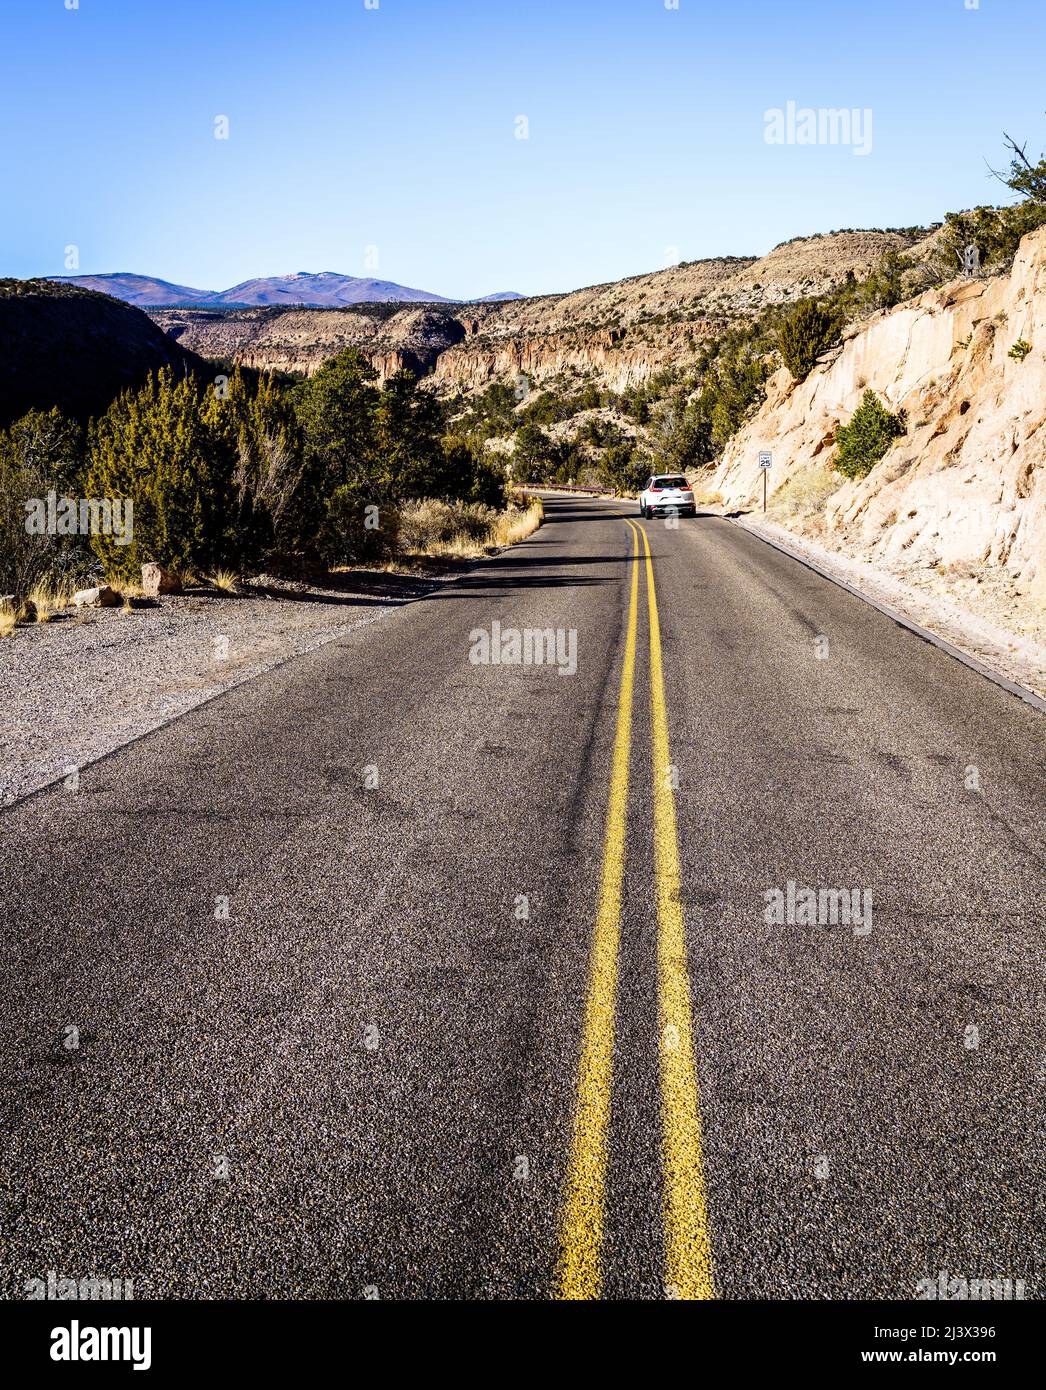 Road through the Frijoles Canyon in Bandelier National Monument, New Mexico Stock Photo